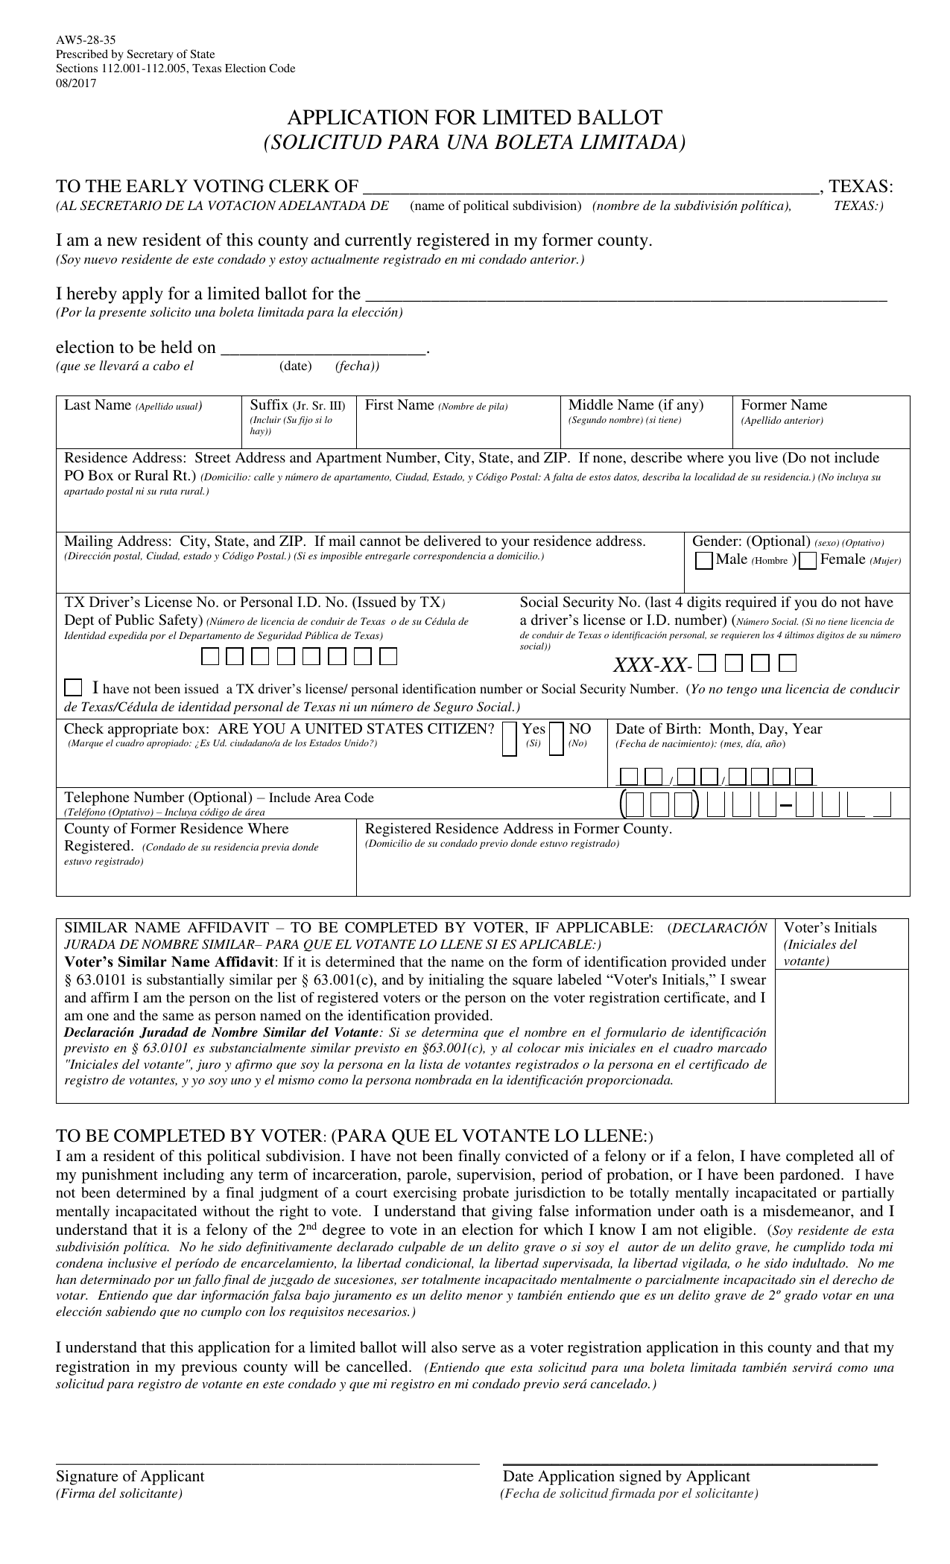 Form AW5-28-35 Application for Limited Ballot - Texas (English / Spanish), Page 1